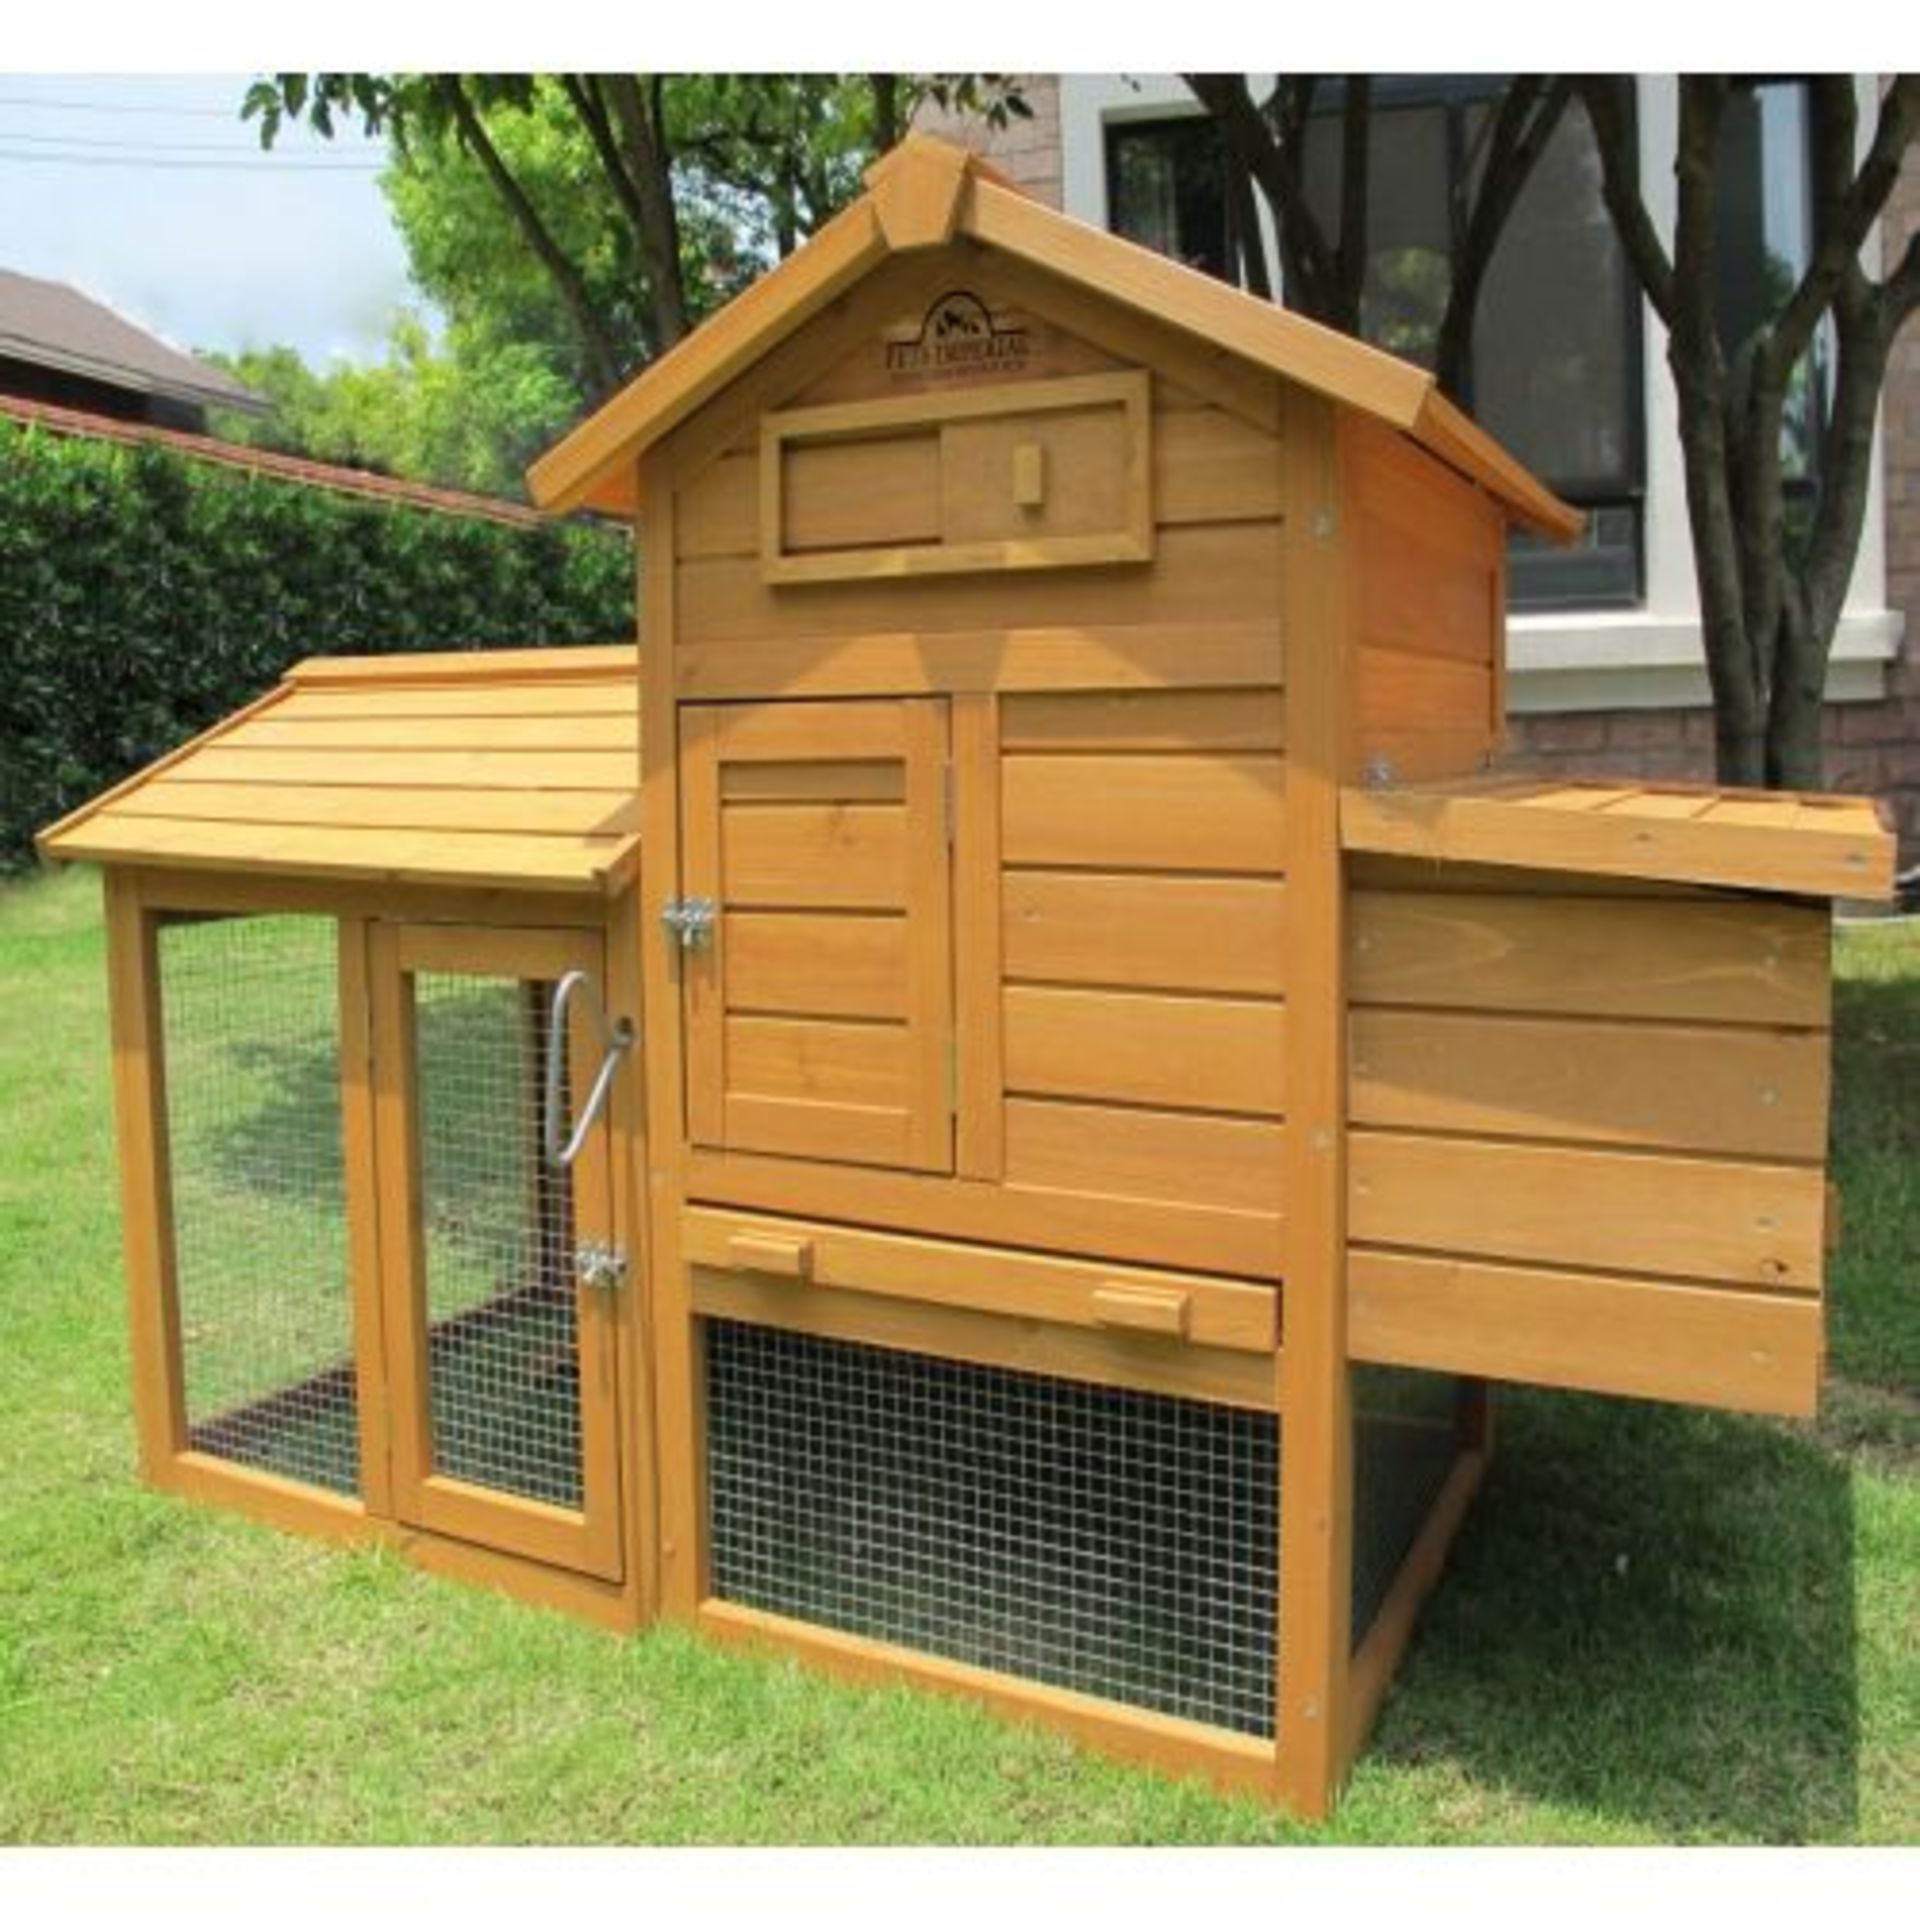 Brand New Pets Imperial® Clarence Golden Chicken Coop, The “Clarence” is a small chicken coop that